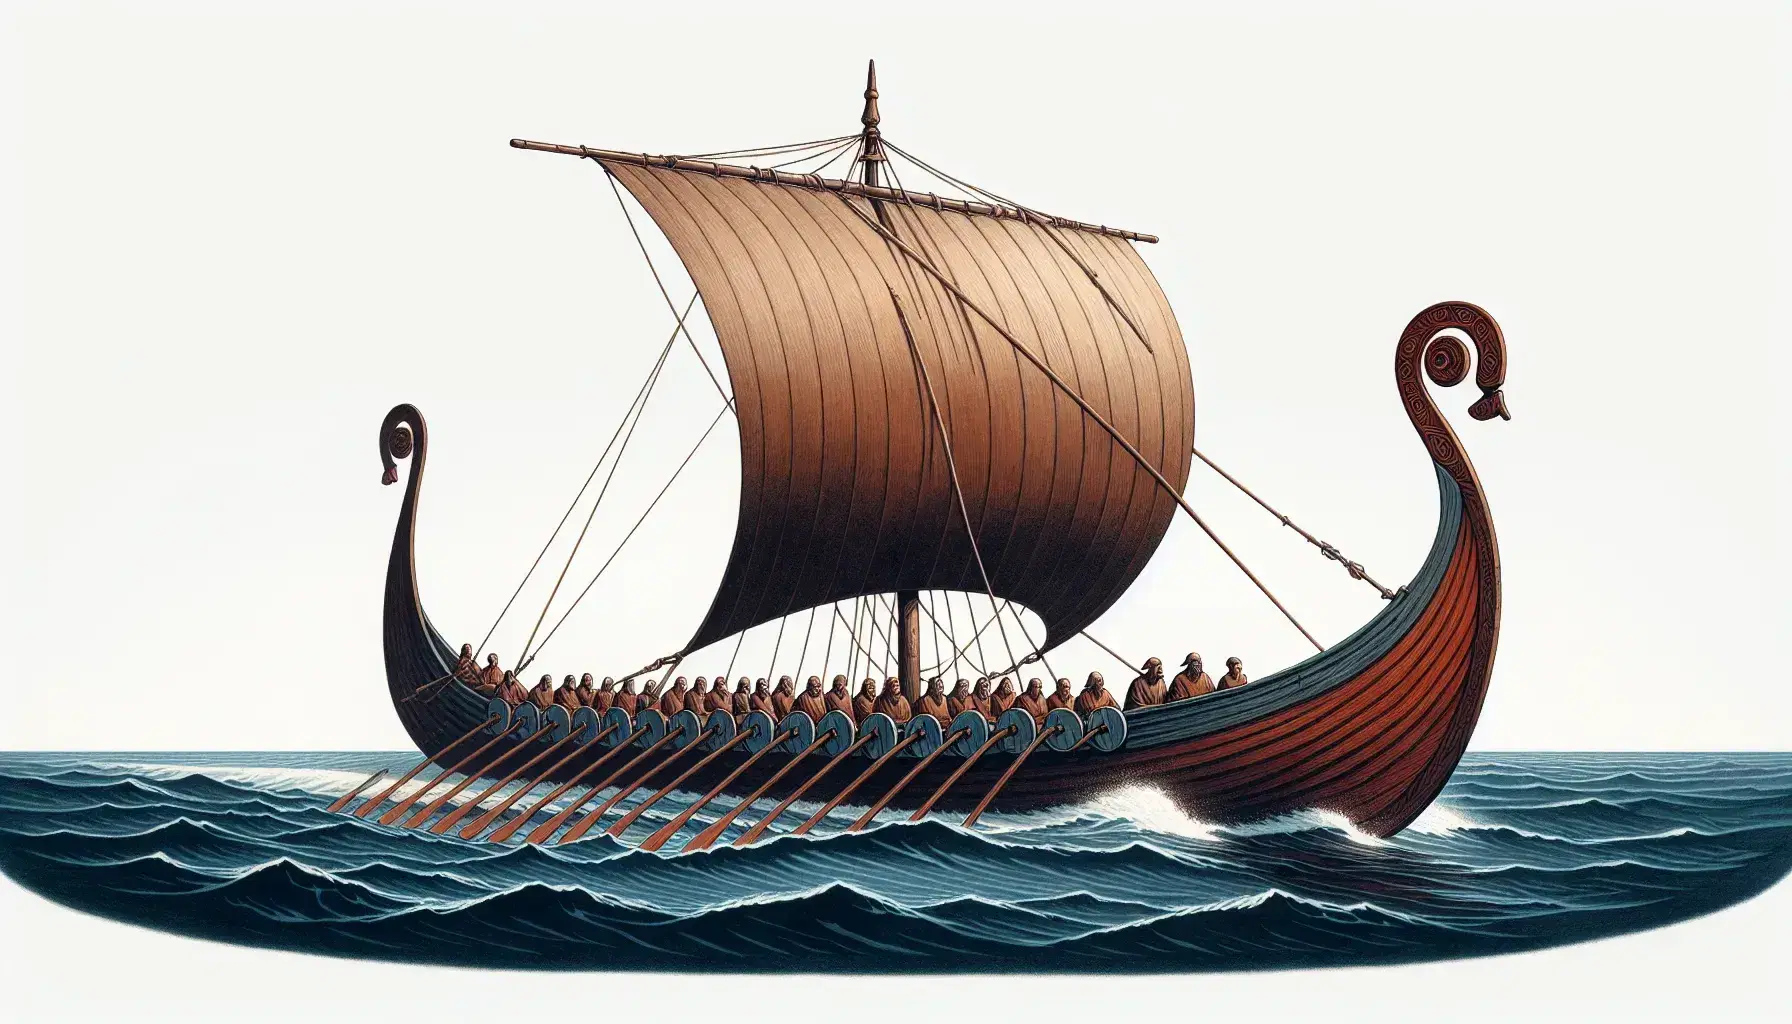 Viking longship at sea with rowers and red sail, curved prow with serpent head, on calm blue waters under a gradient sky at dawn or dusk.